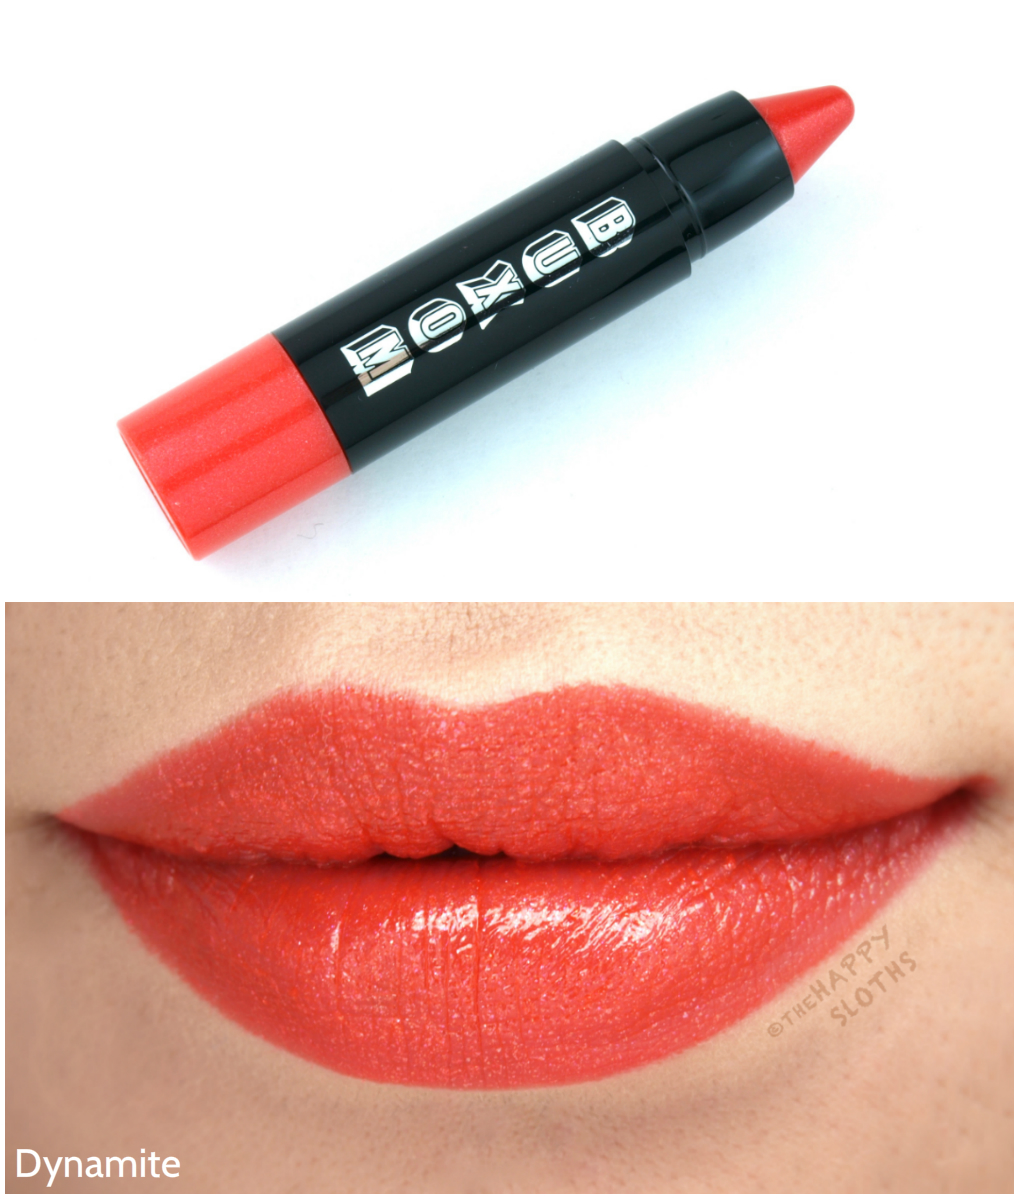 Buxom Shimmer Shock Lip Stick in Dynamite: Review and Swatches